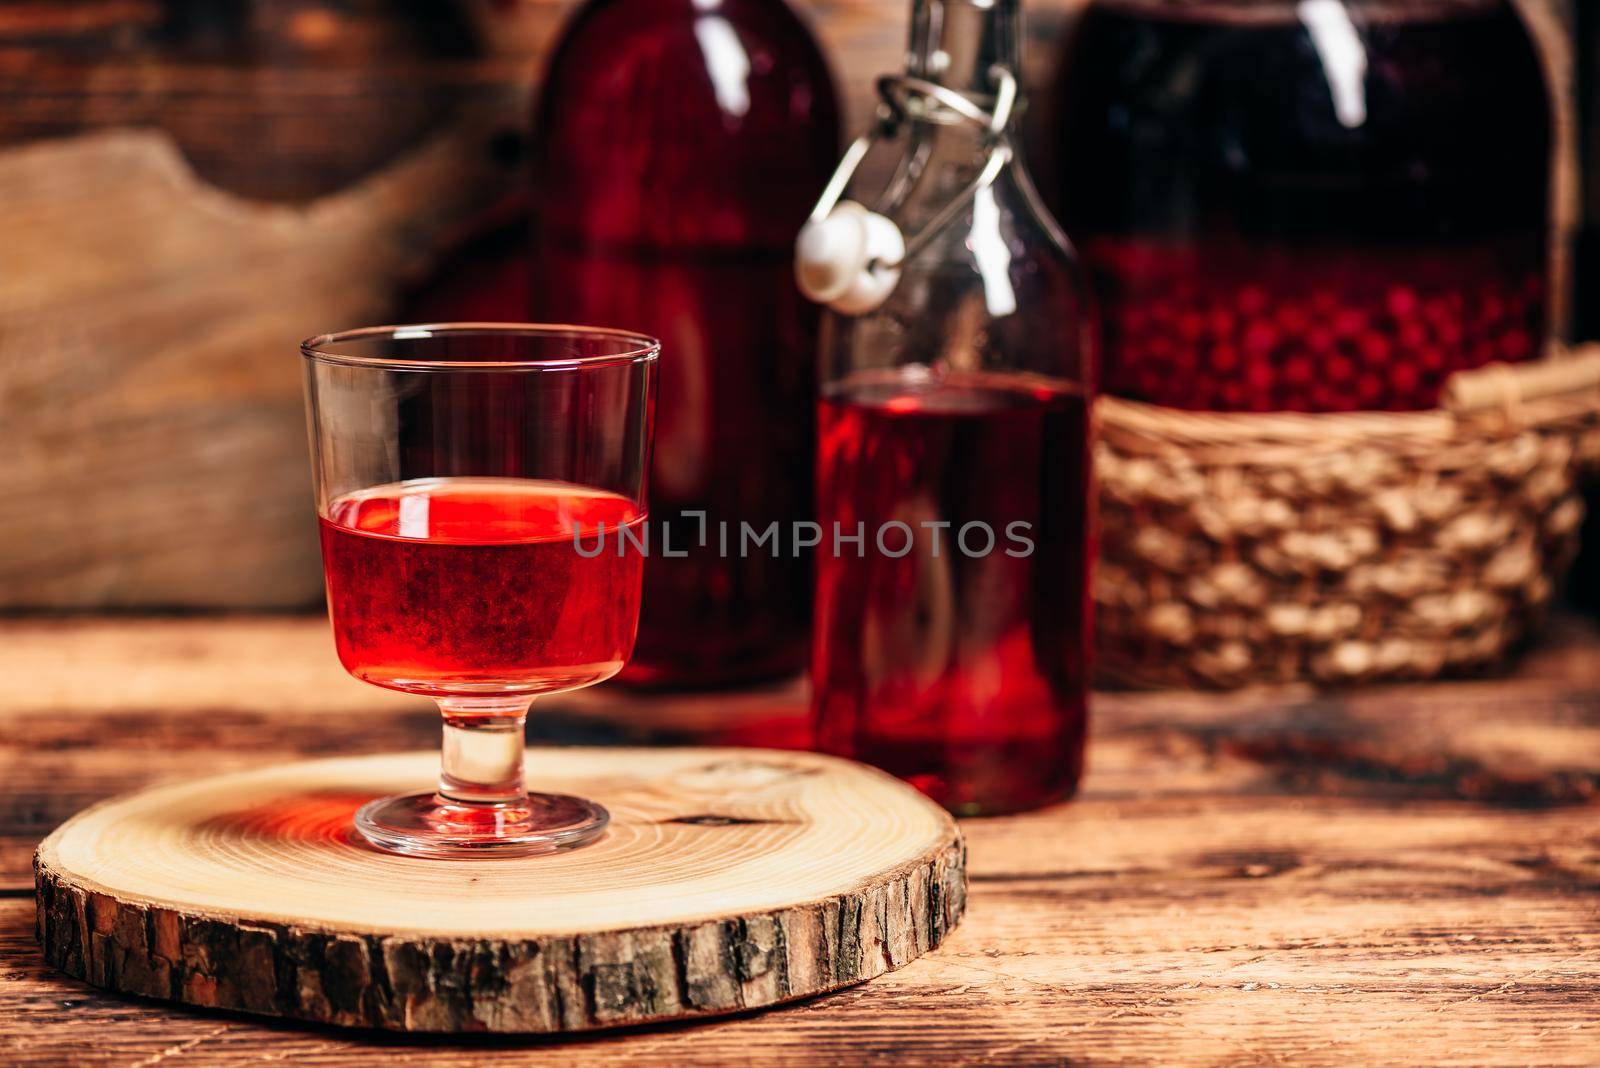 Homemade red currant liquor in wine glass